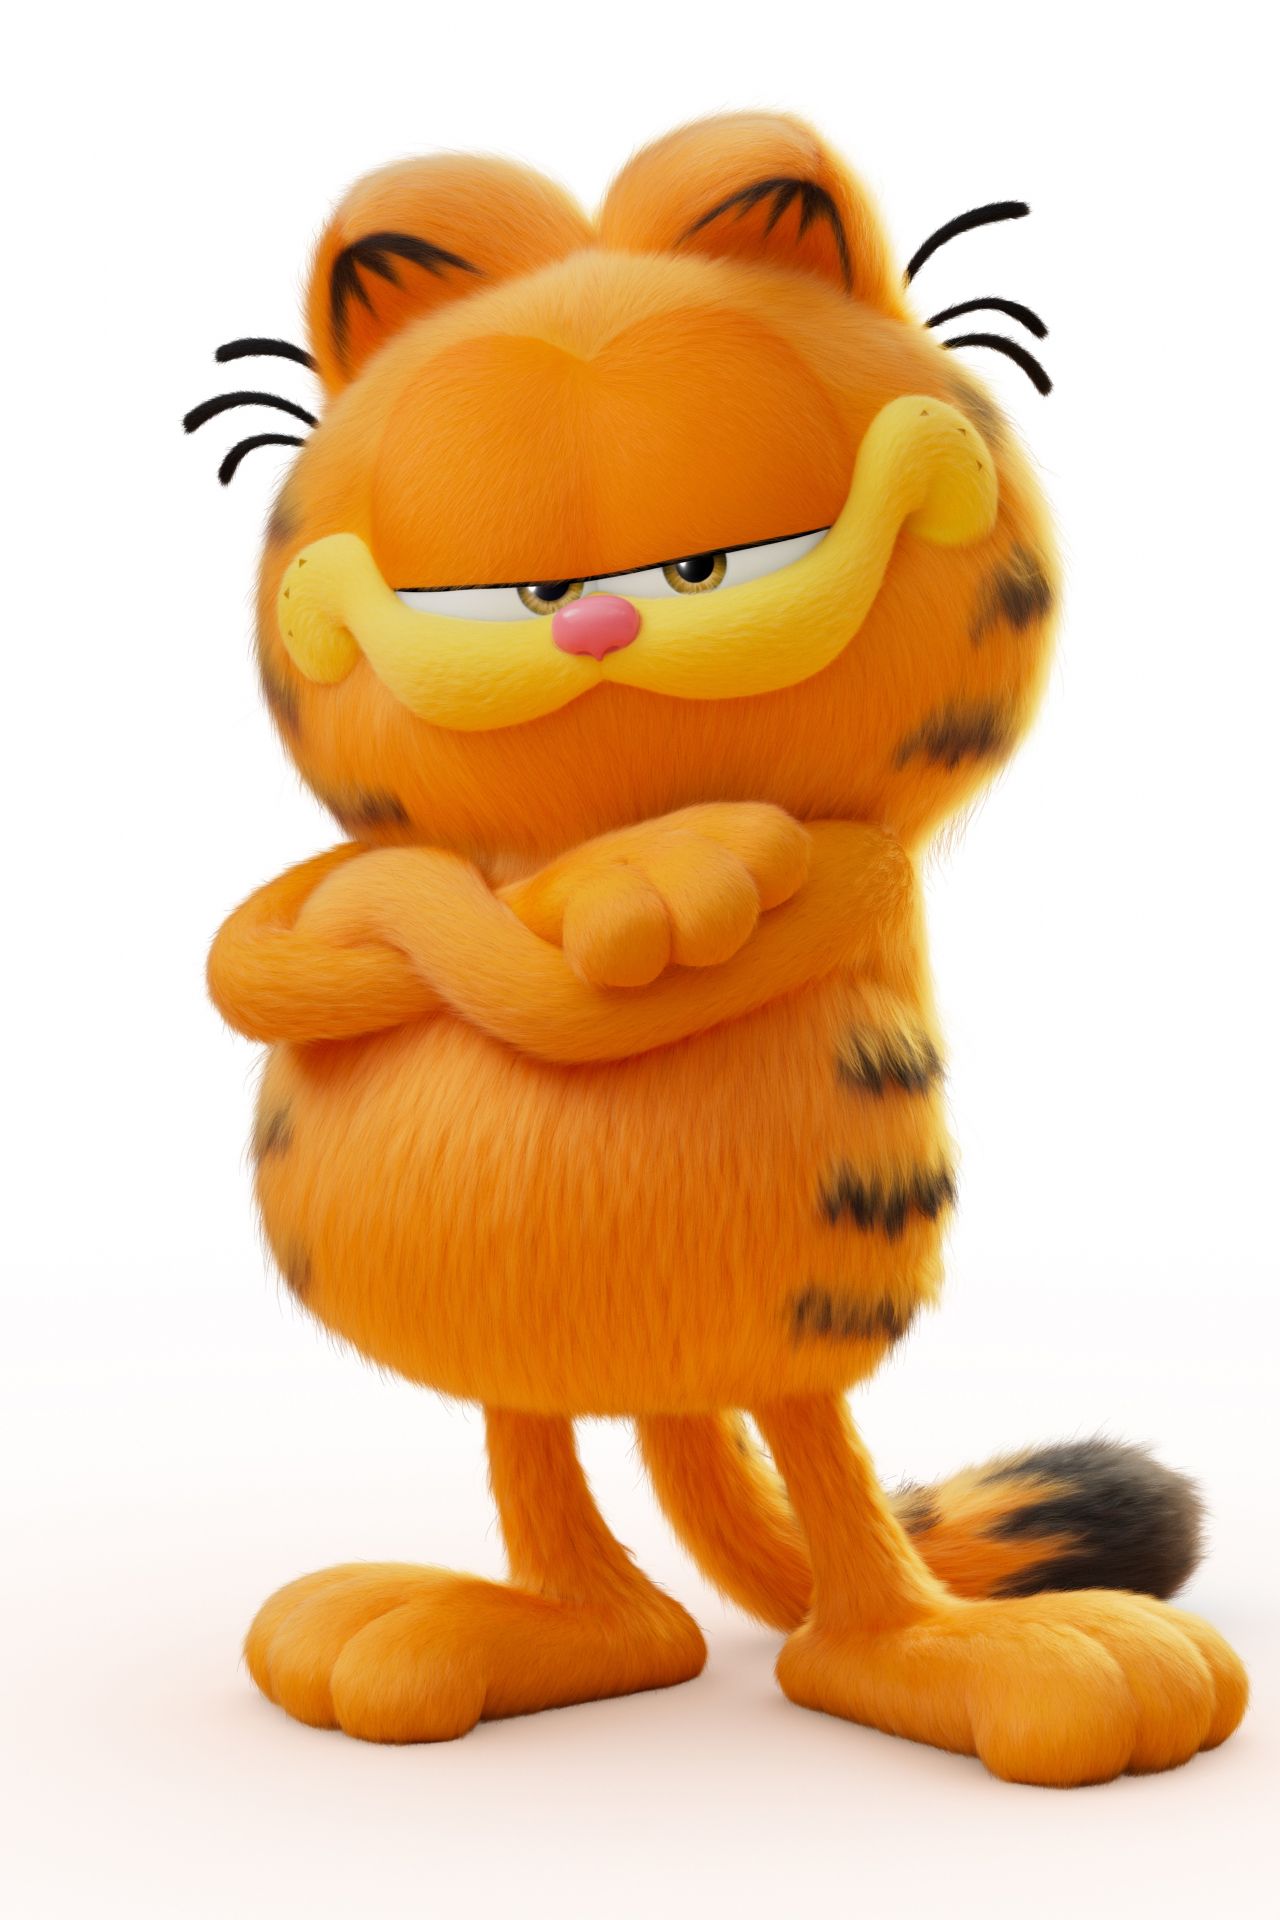 The Garfield Movie Trailer Released United States KNews.MEDIA